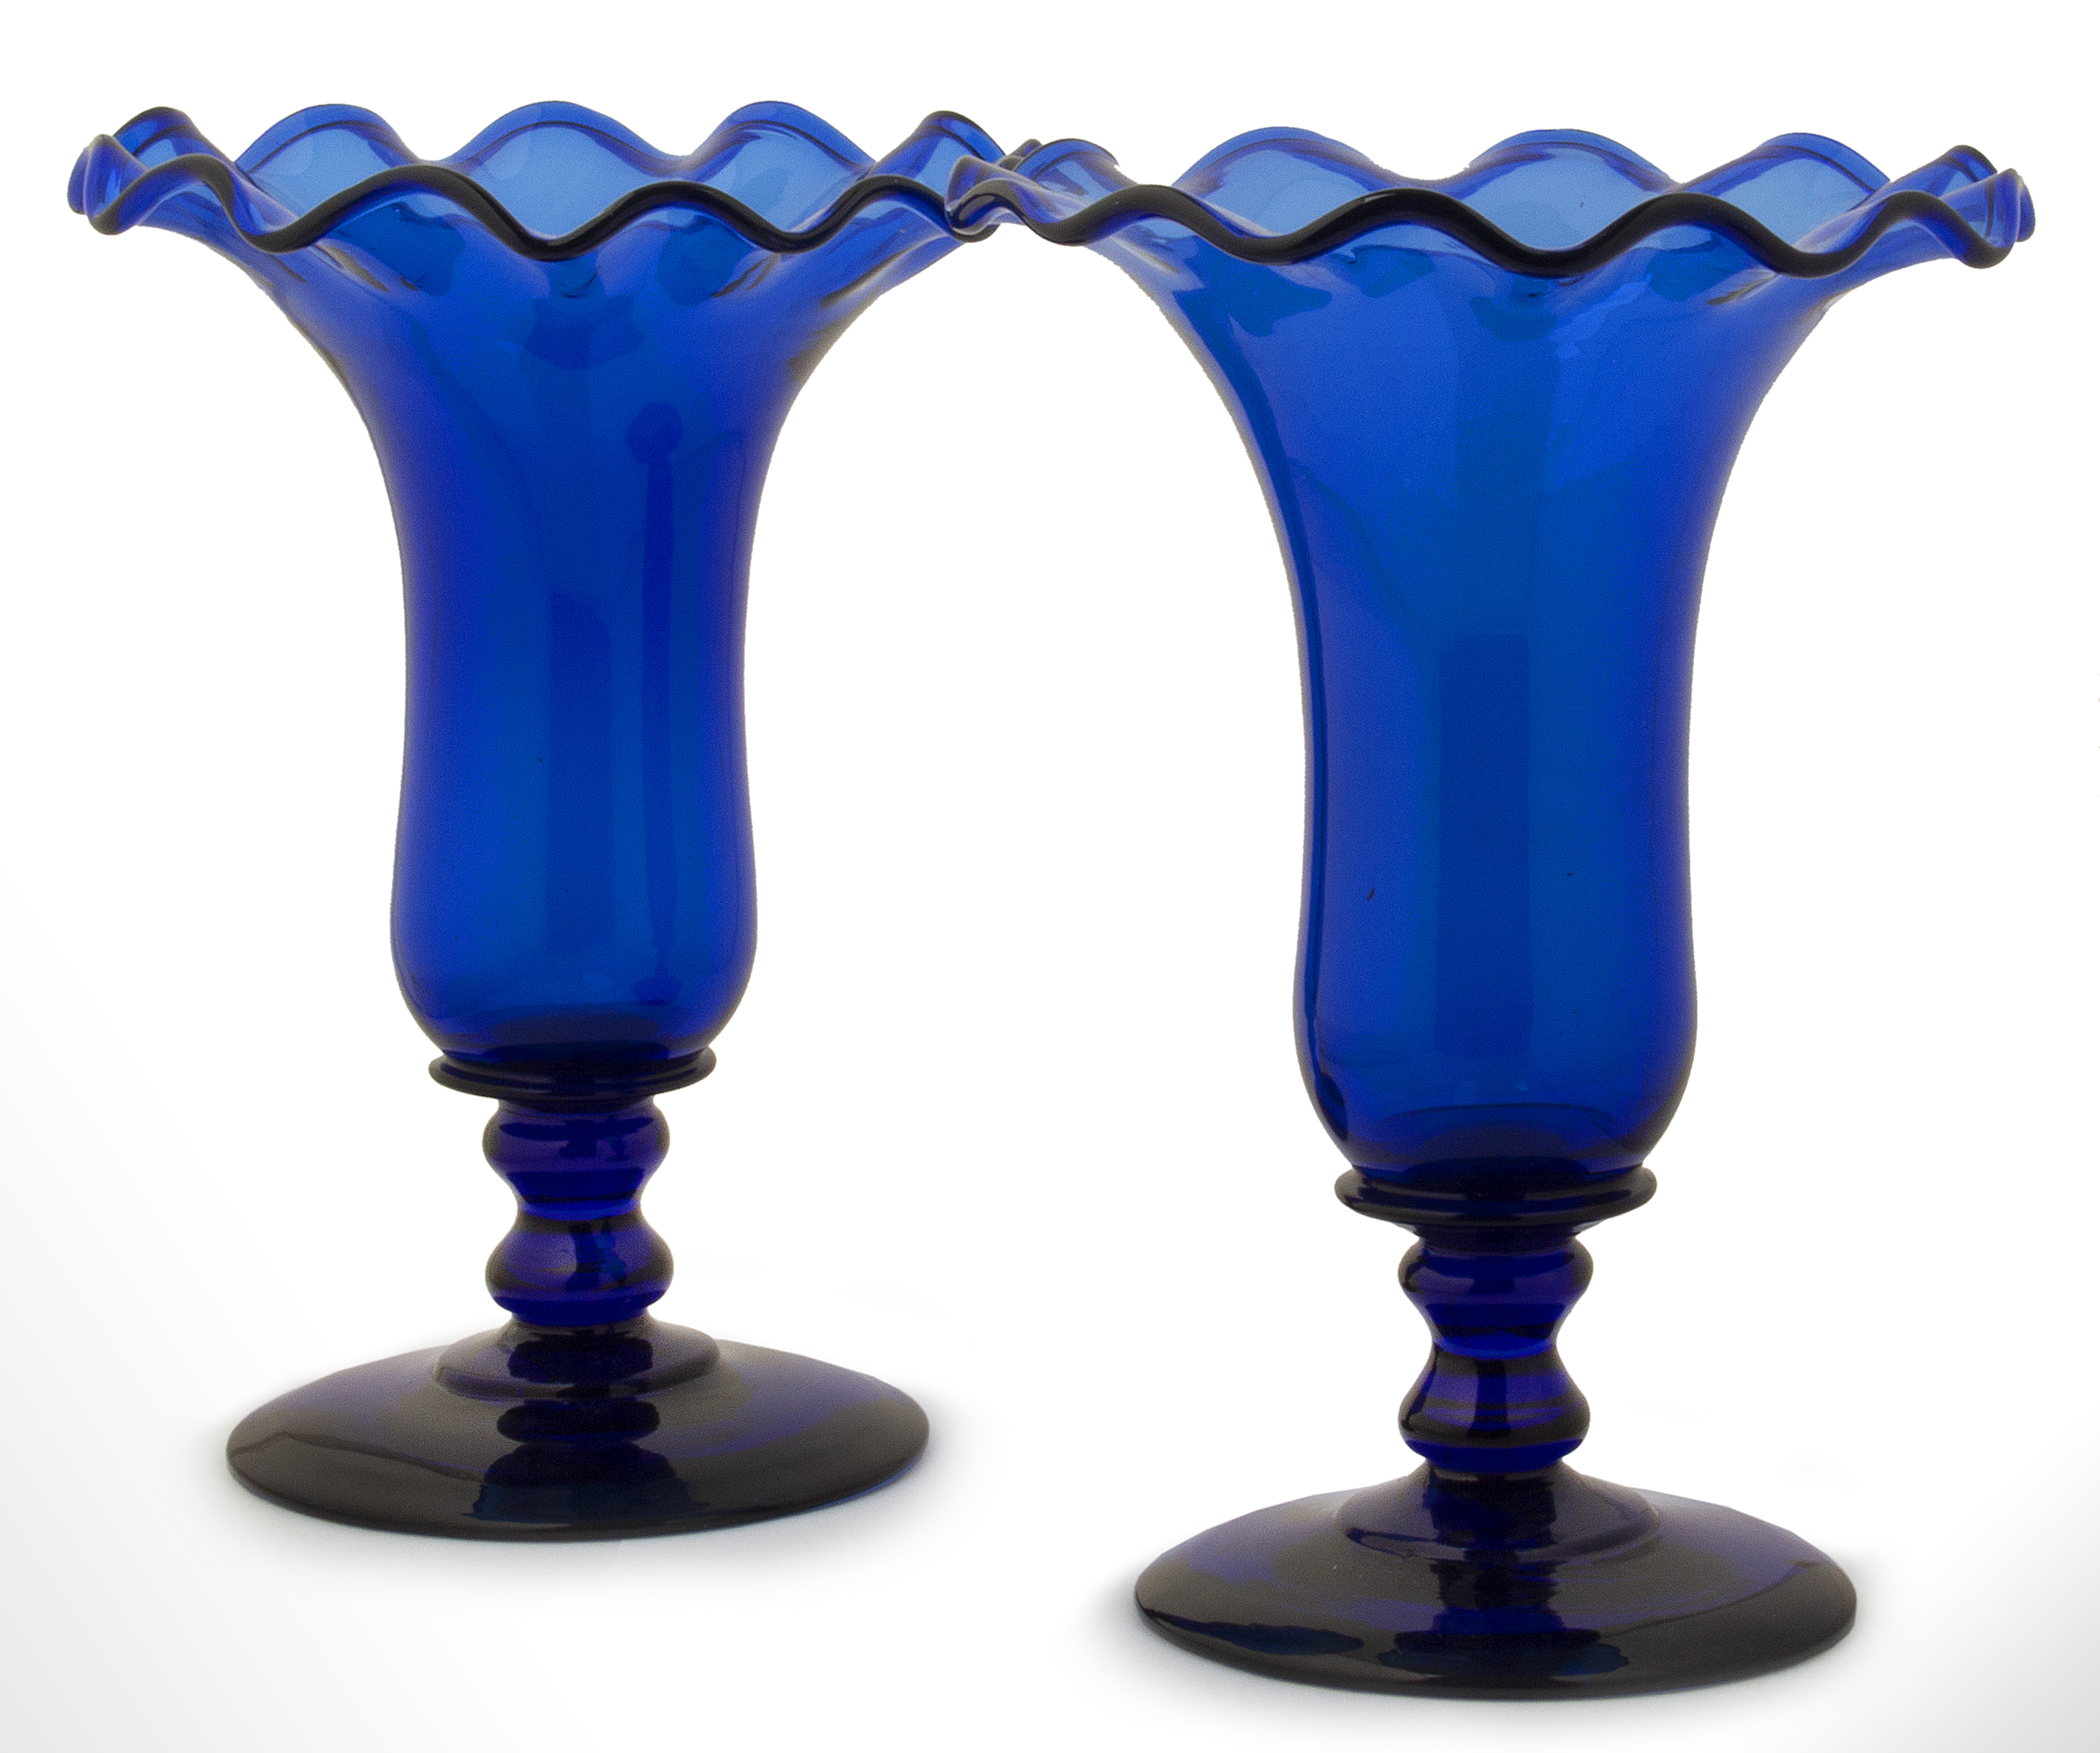 Free-Blown Vases, Folded & Crimped Rim, Cobalt 
Attributed to the New England Glass Co., or Boston and Sandwich
Circa 1840-1860, entire view 1